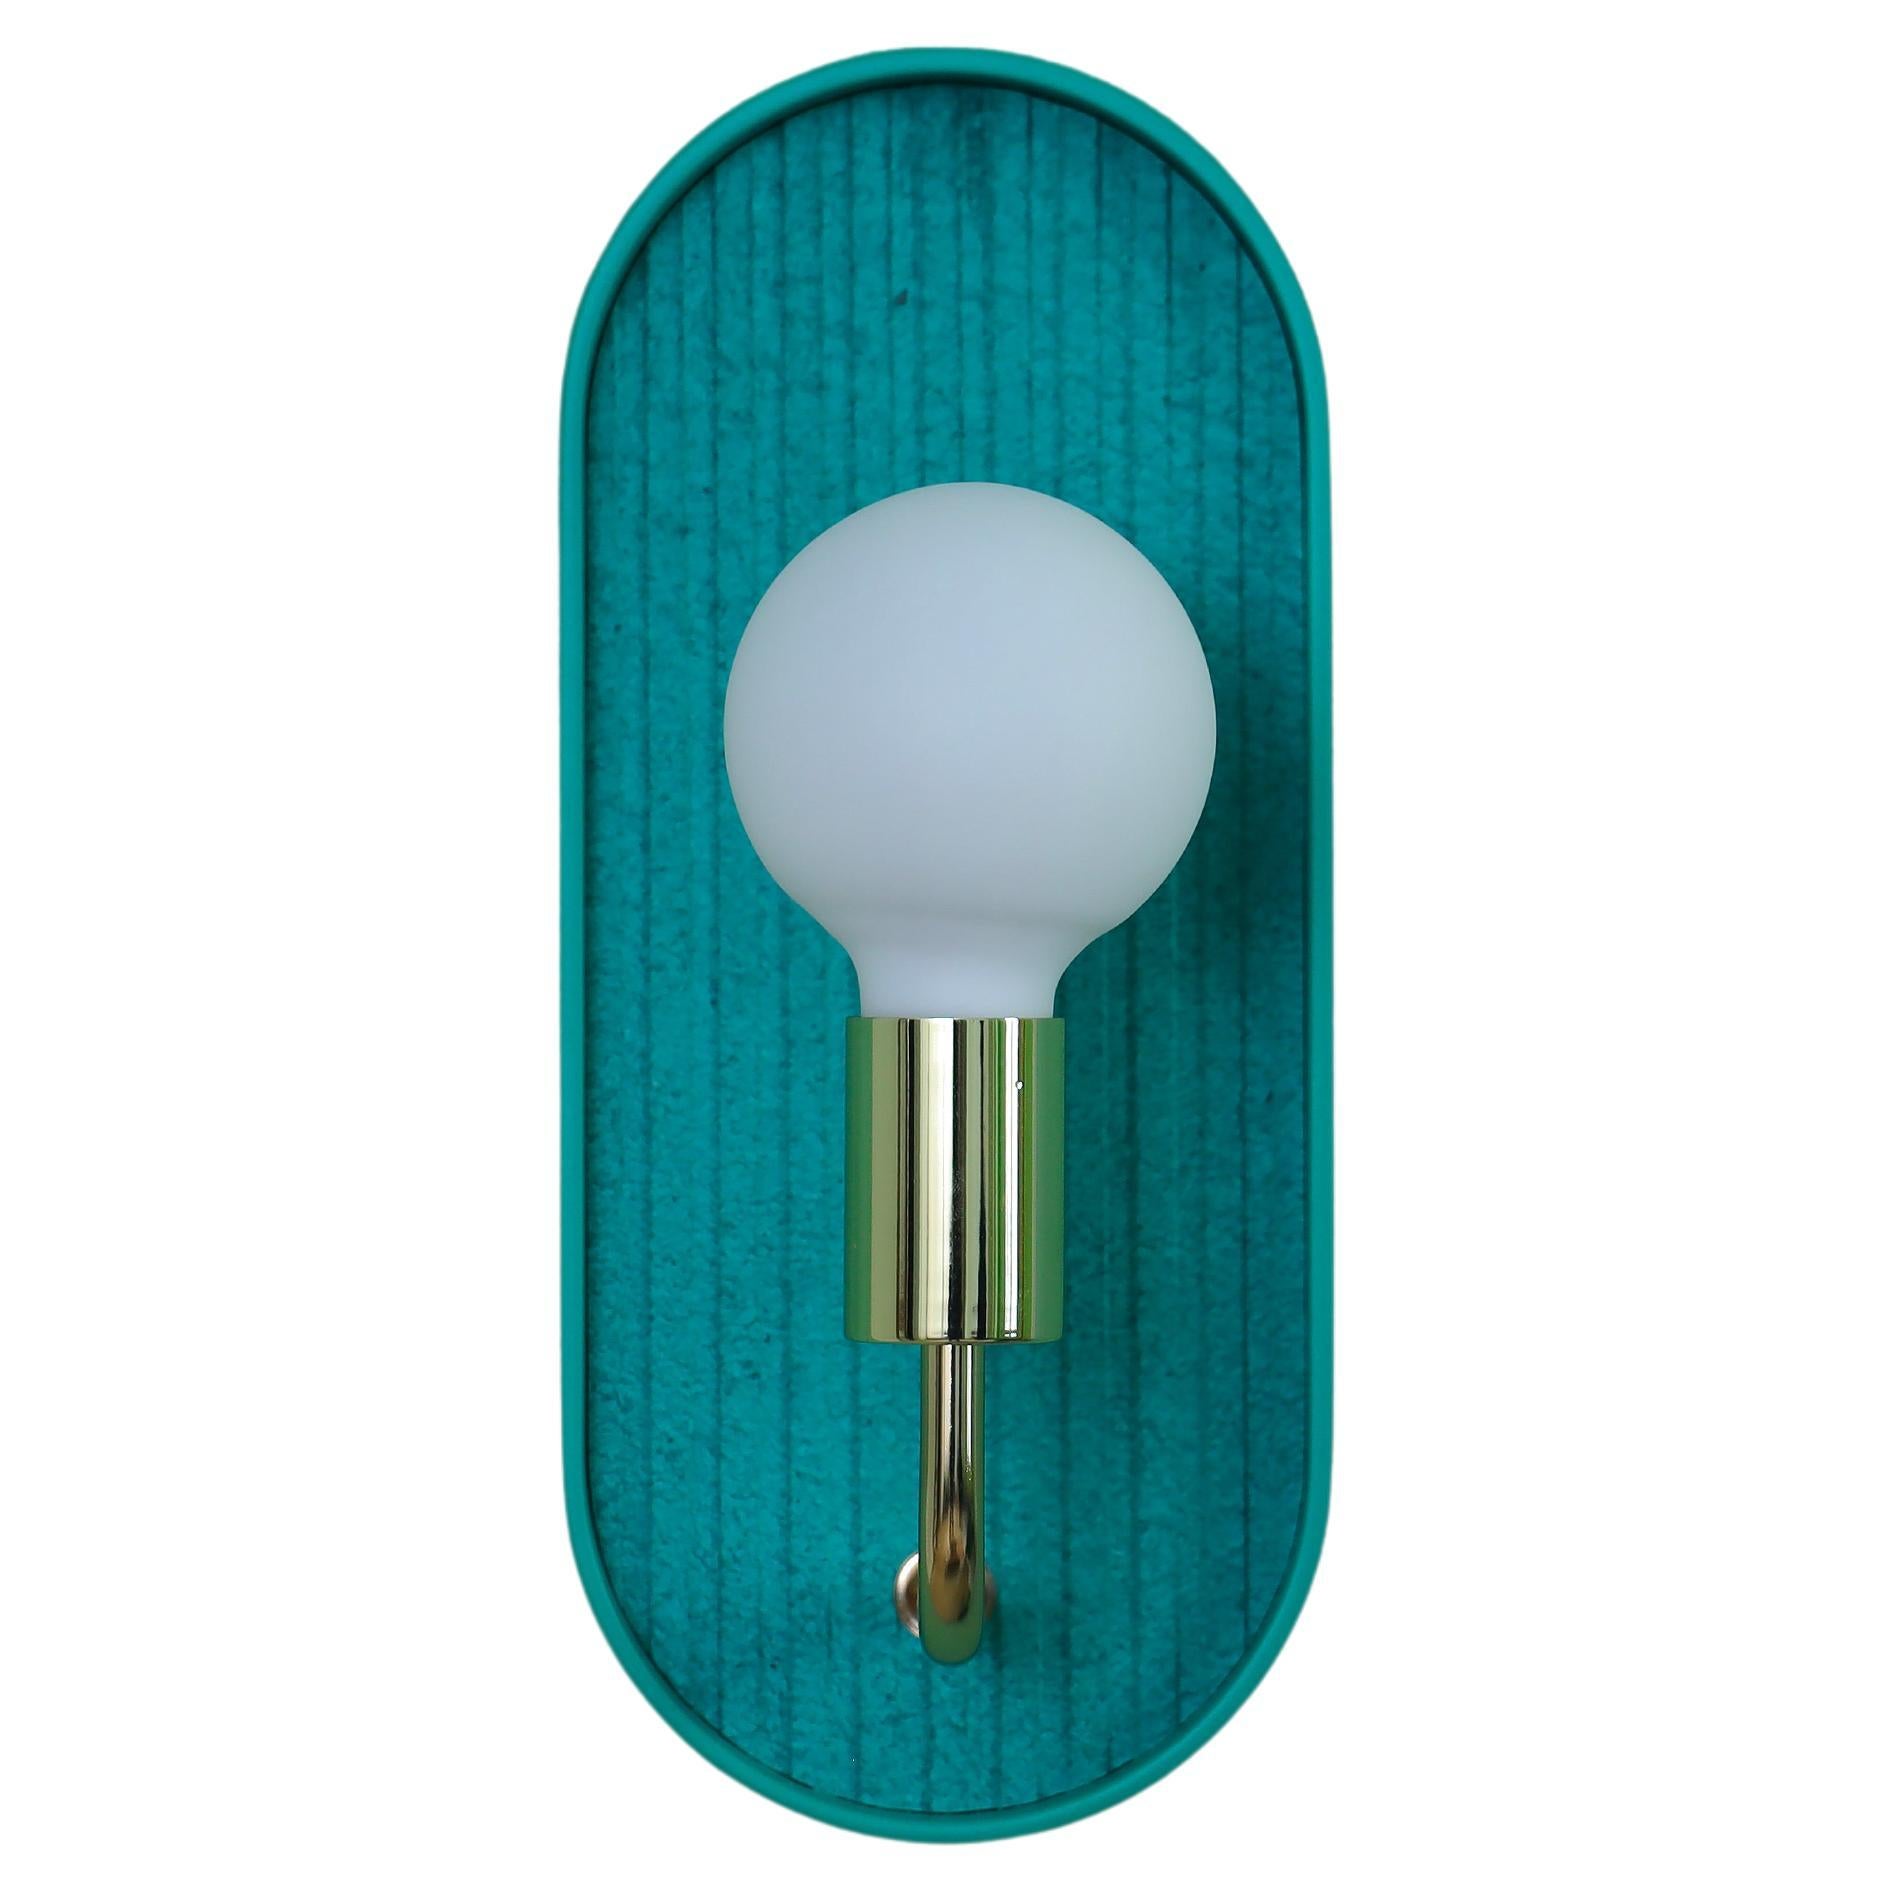 Bracketlamp MiniOblong green - green lacquered solid basswood and paper in Stock